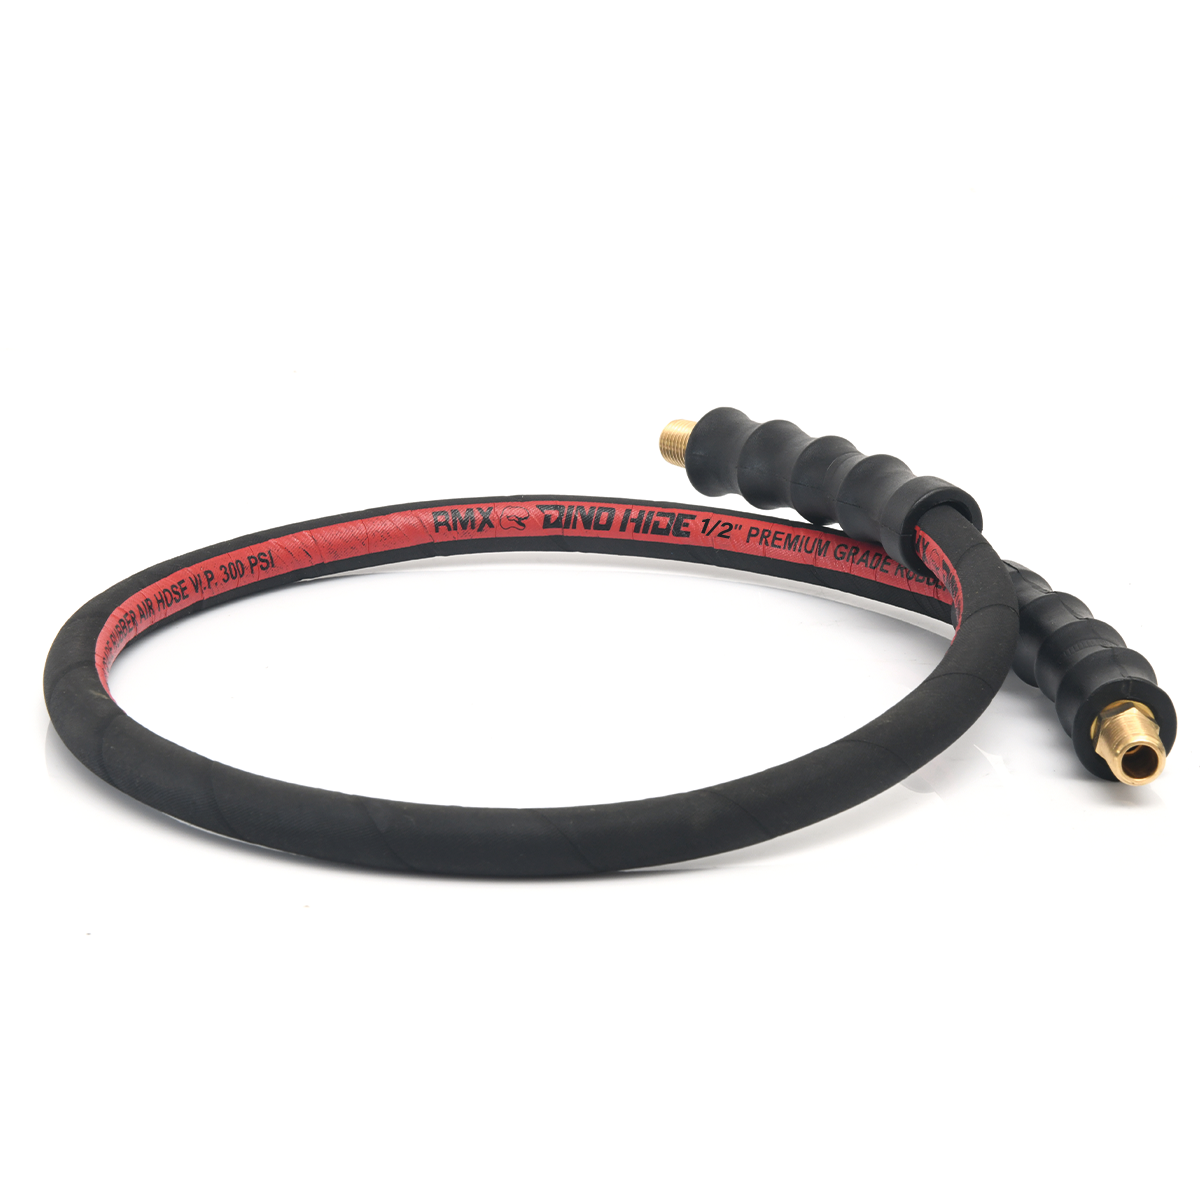 Dino-Hide 1/2" x 3' Rubber Lead-in Air Hose with 1/2" Brass MNPT Fittings, 3/8" Reducer